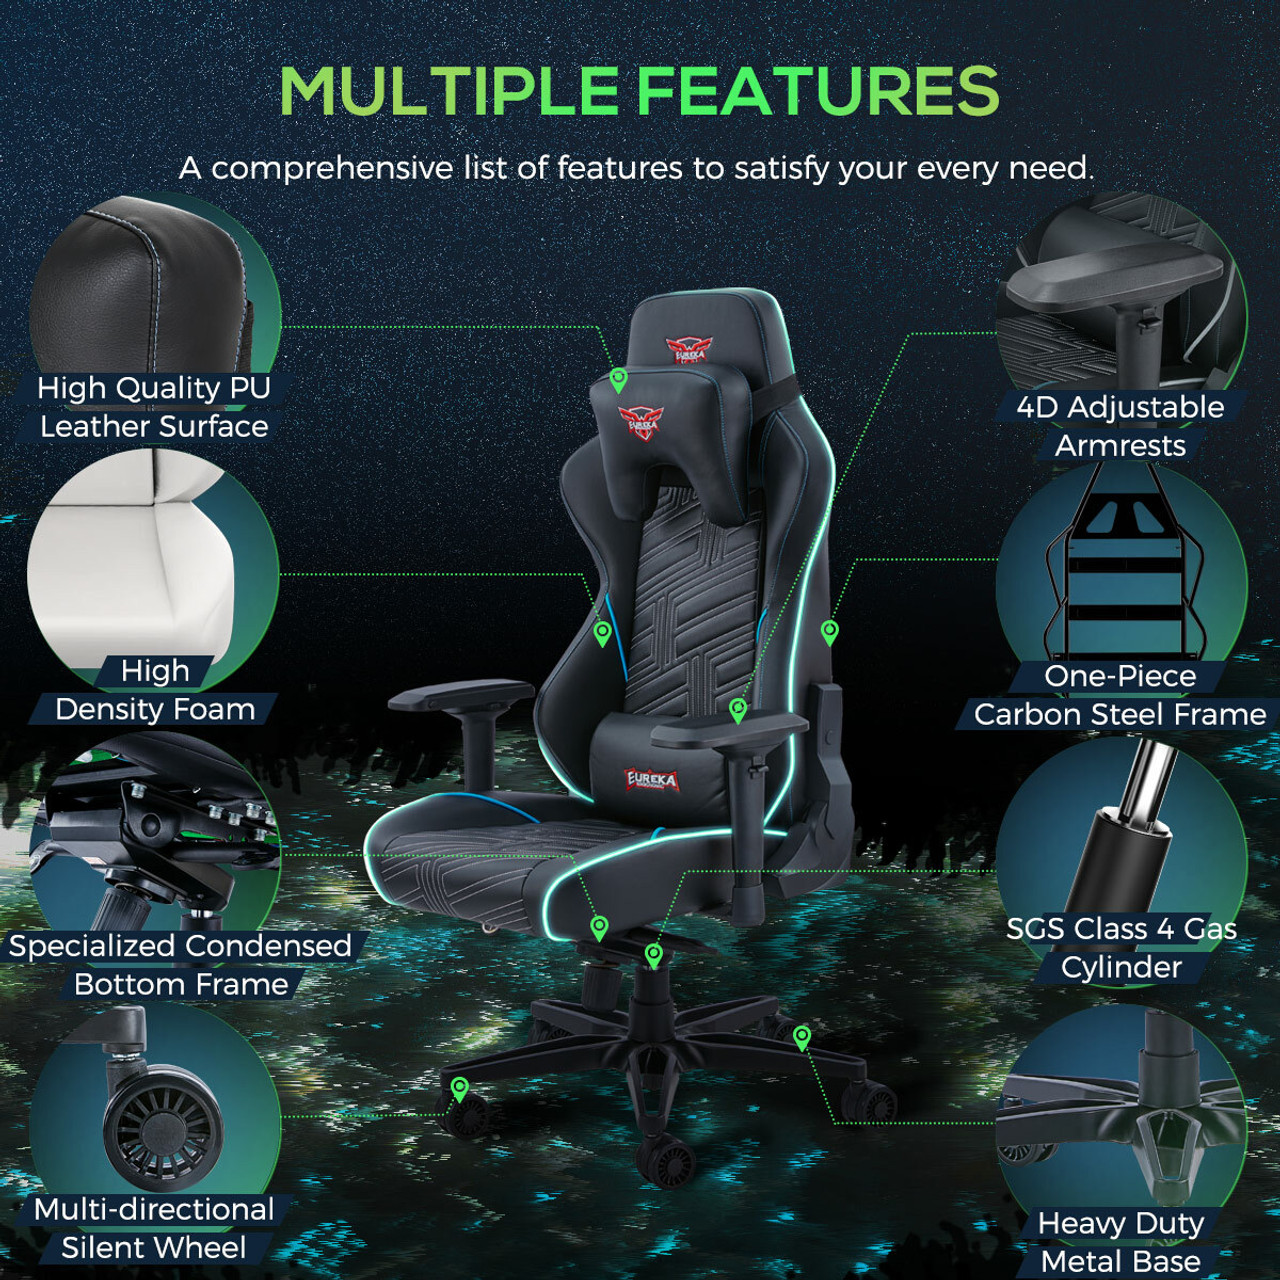 mutliple features gaming chair